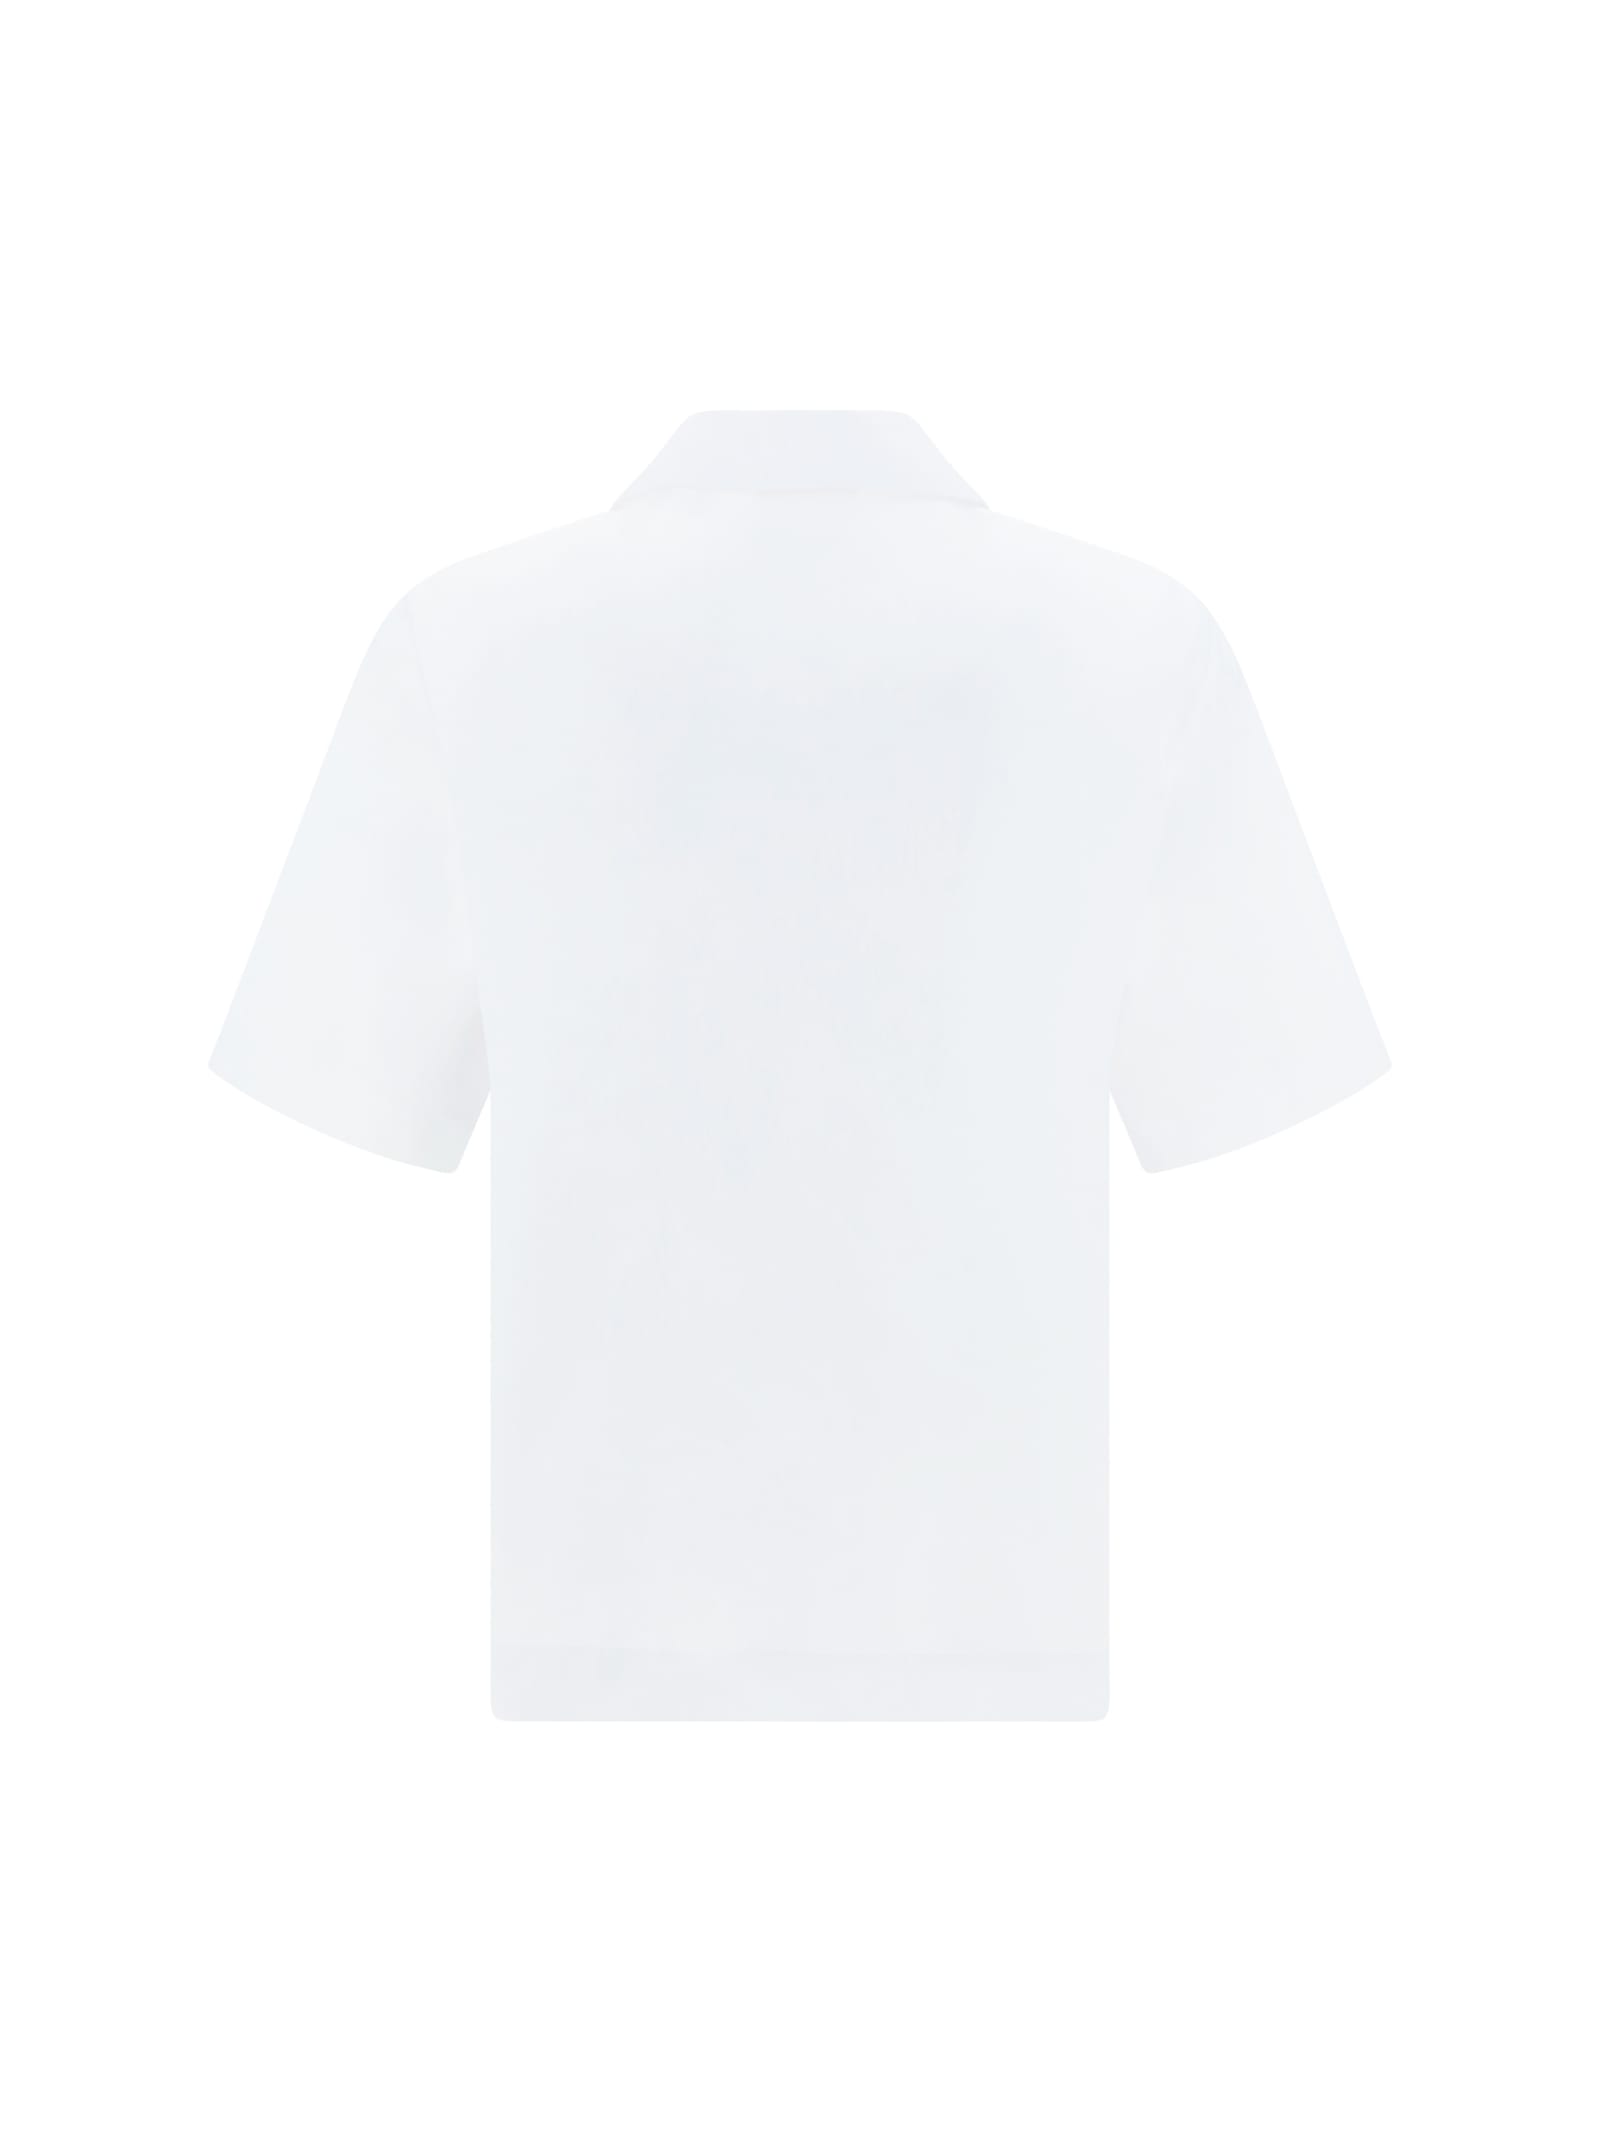 Shop Givenchy Boxy Shirt In White